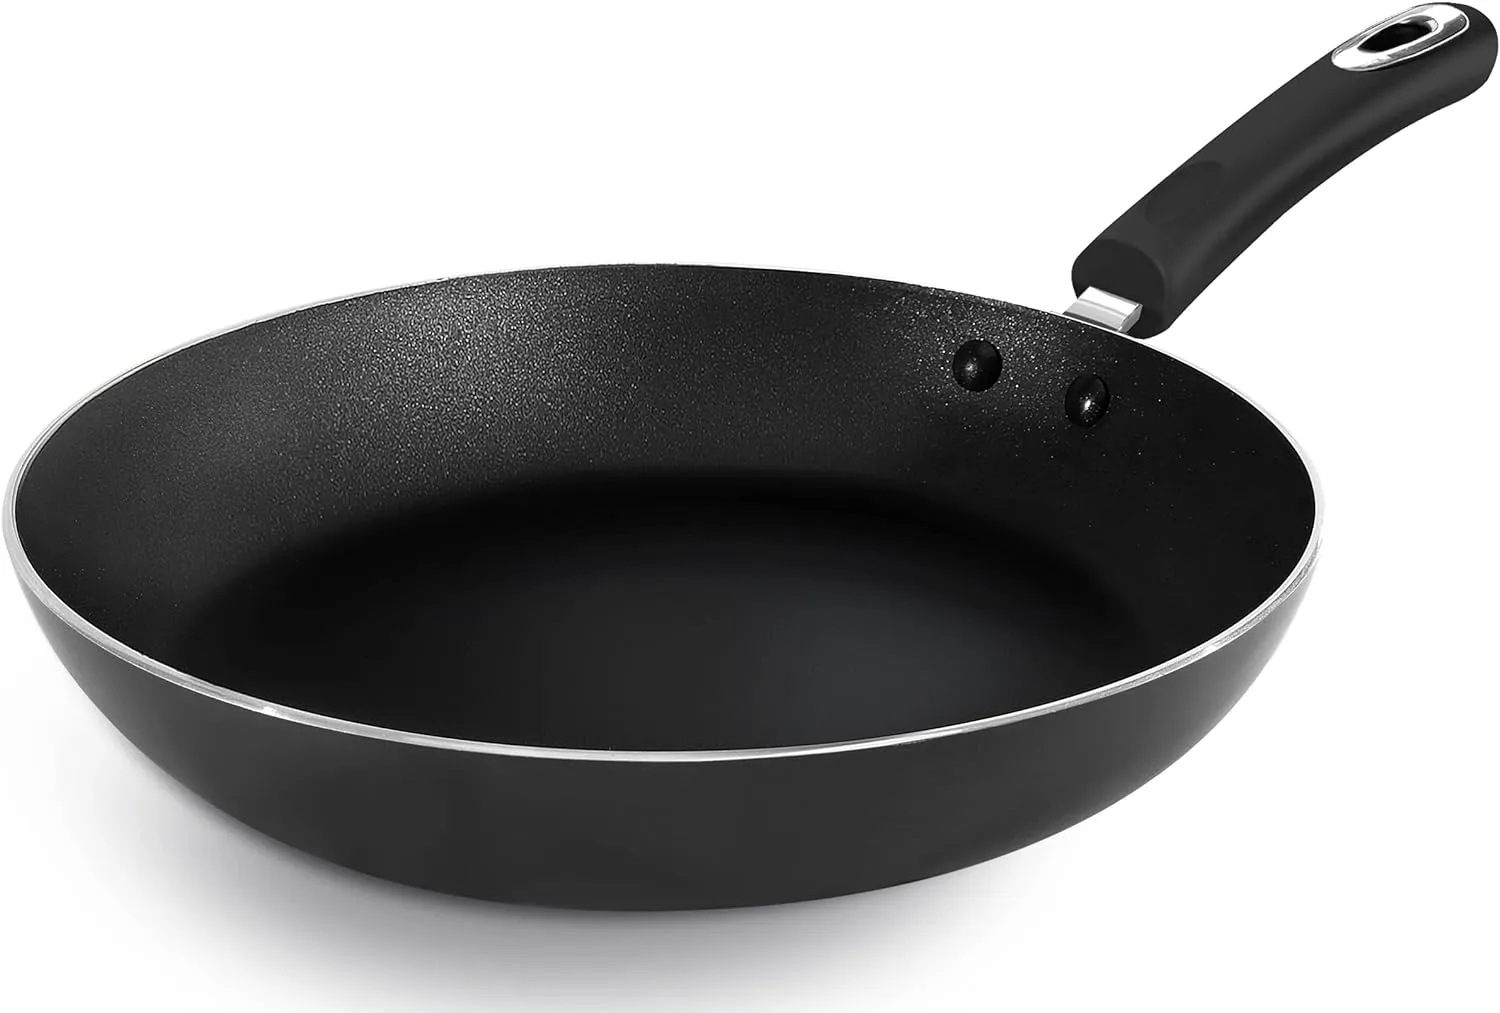 Utopia Kitchen Nonstick Fry Pan Set - Induction Bottom - 8", 9.5", 11" - Aluminum Alloy - Scratch Resistant - Riveted Handle Fast Forward